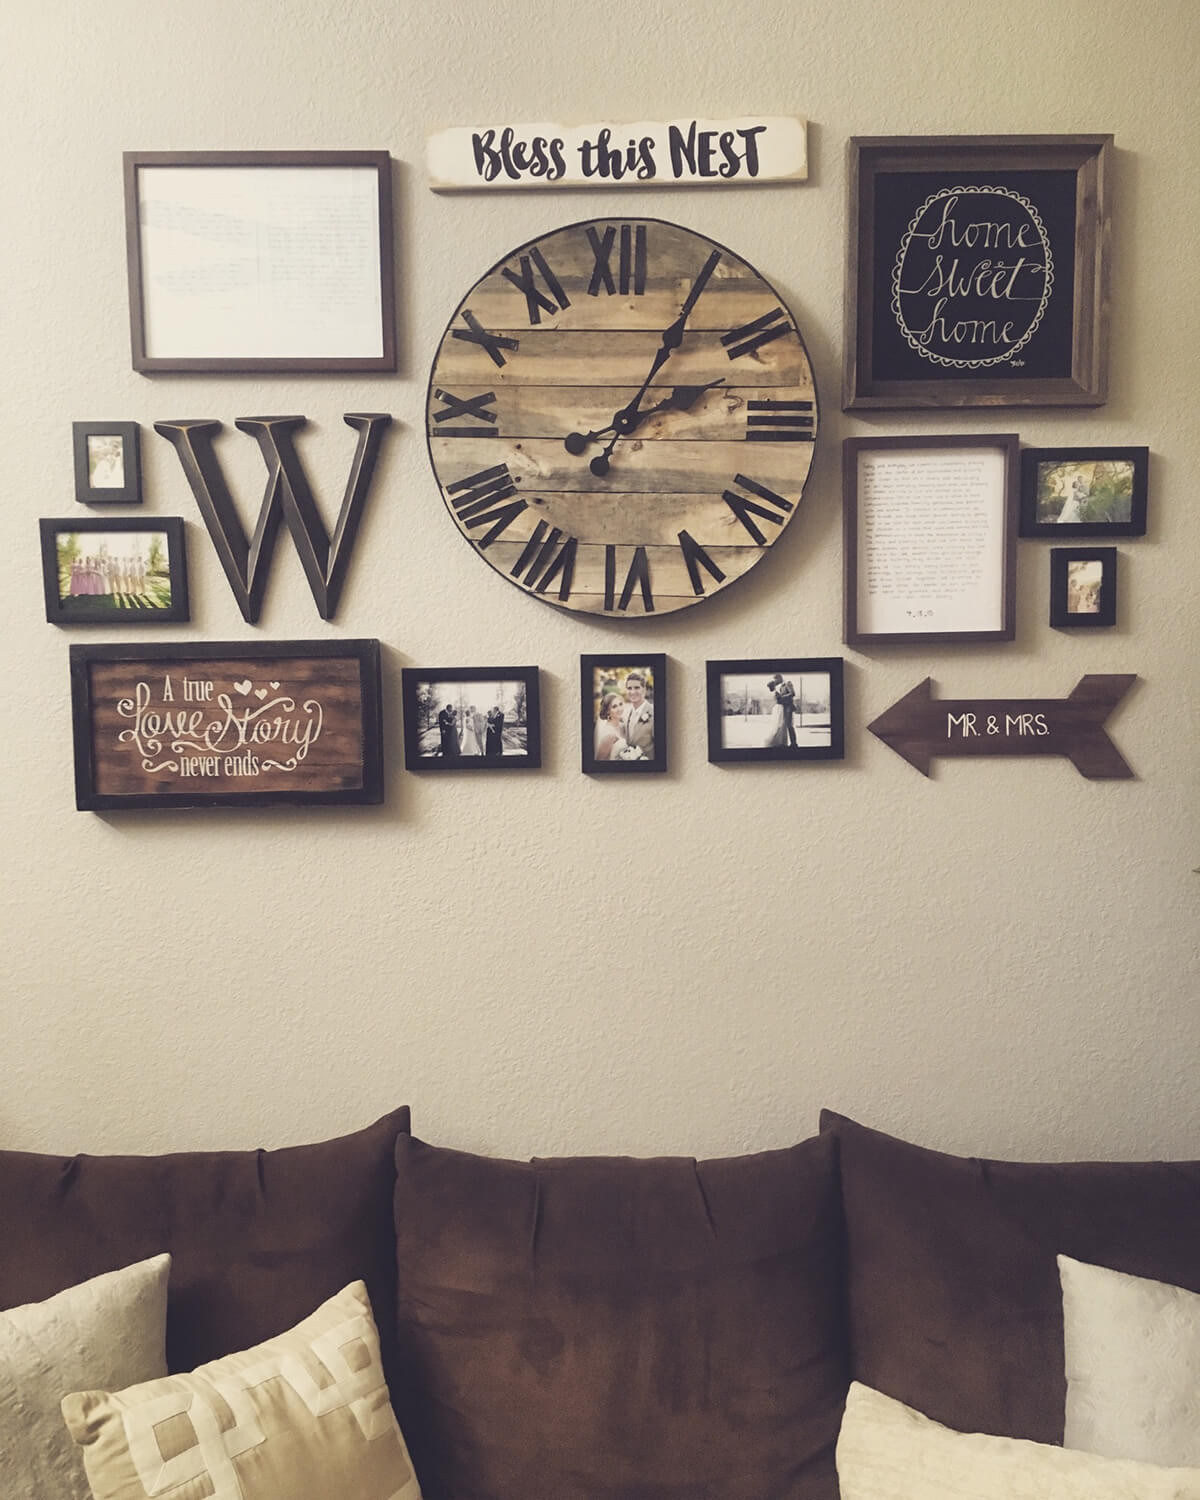 Rustic Living Room Wall Art
 33 Best Rustic Living Room Wall Decor Ideas and Designs